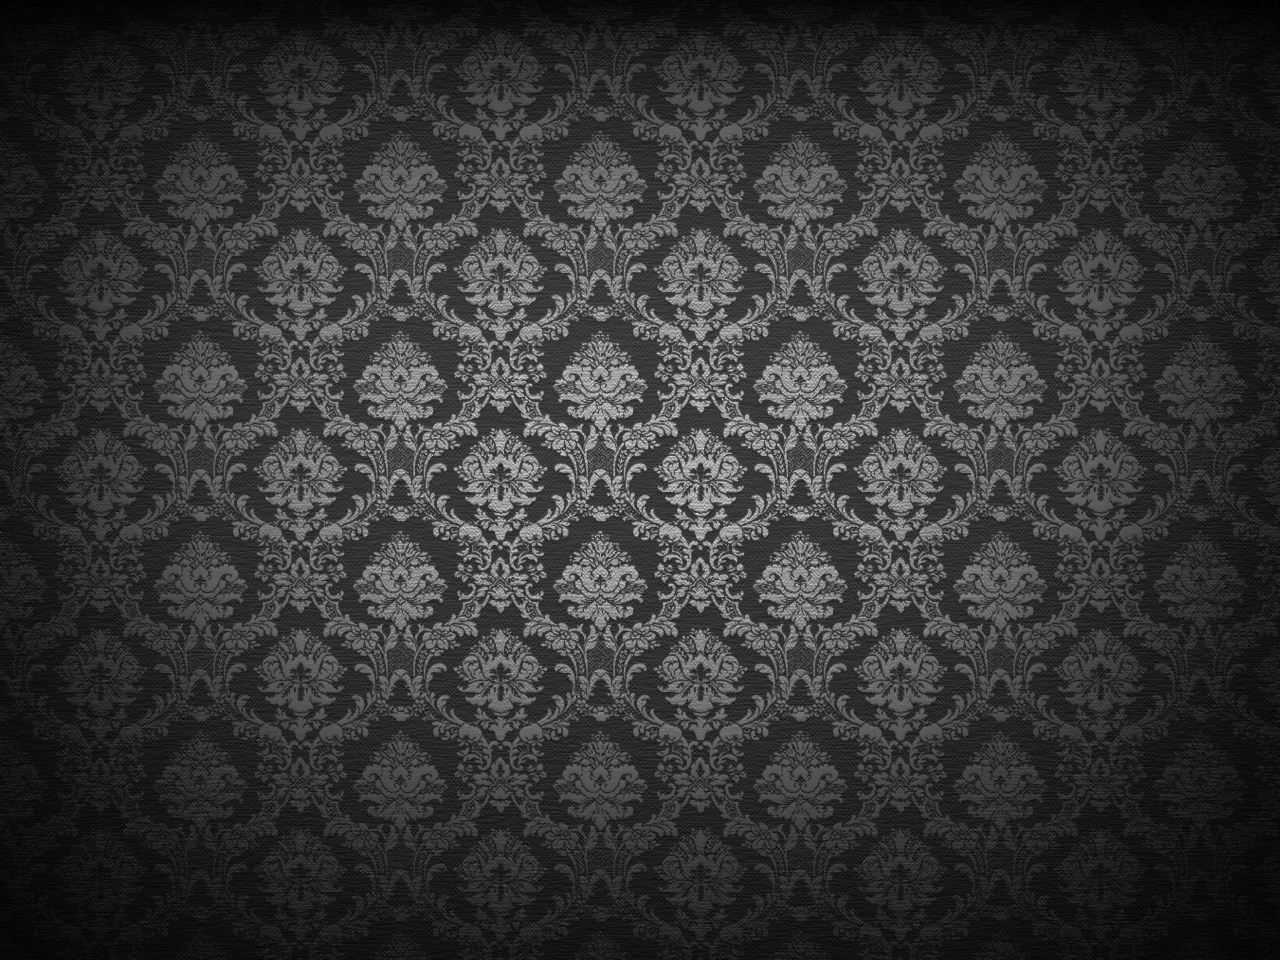 Images of Damask | 1280x960